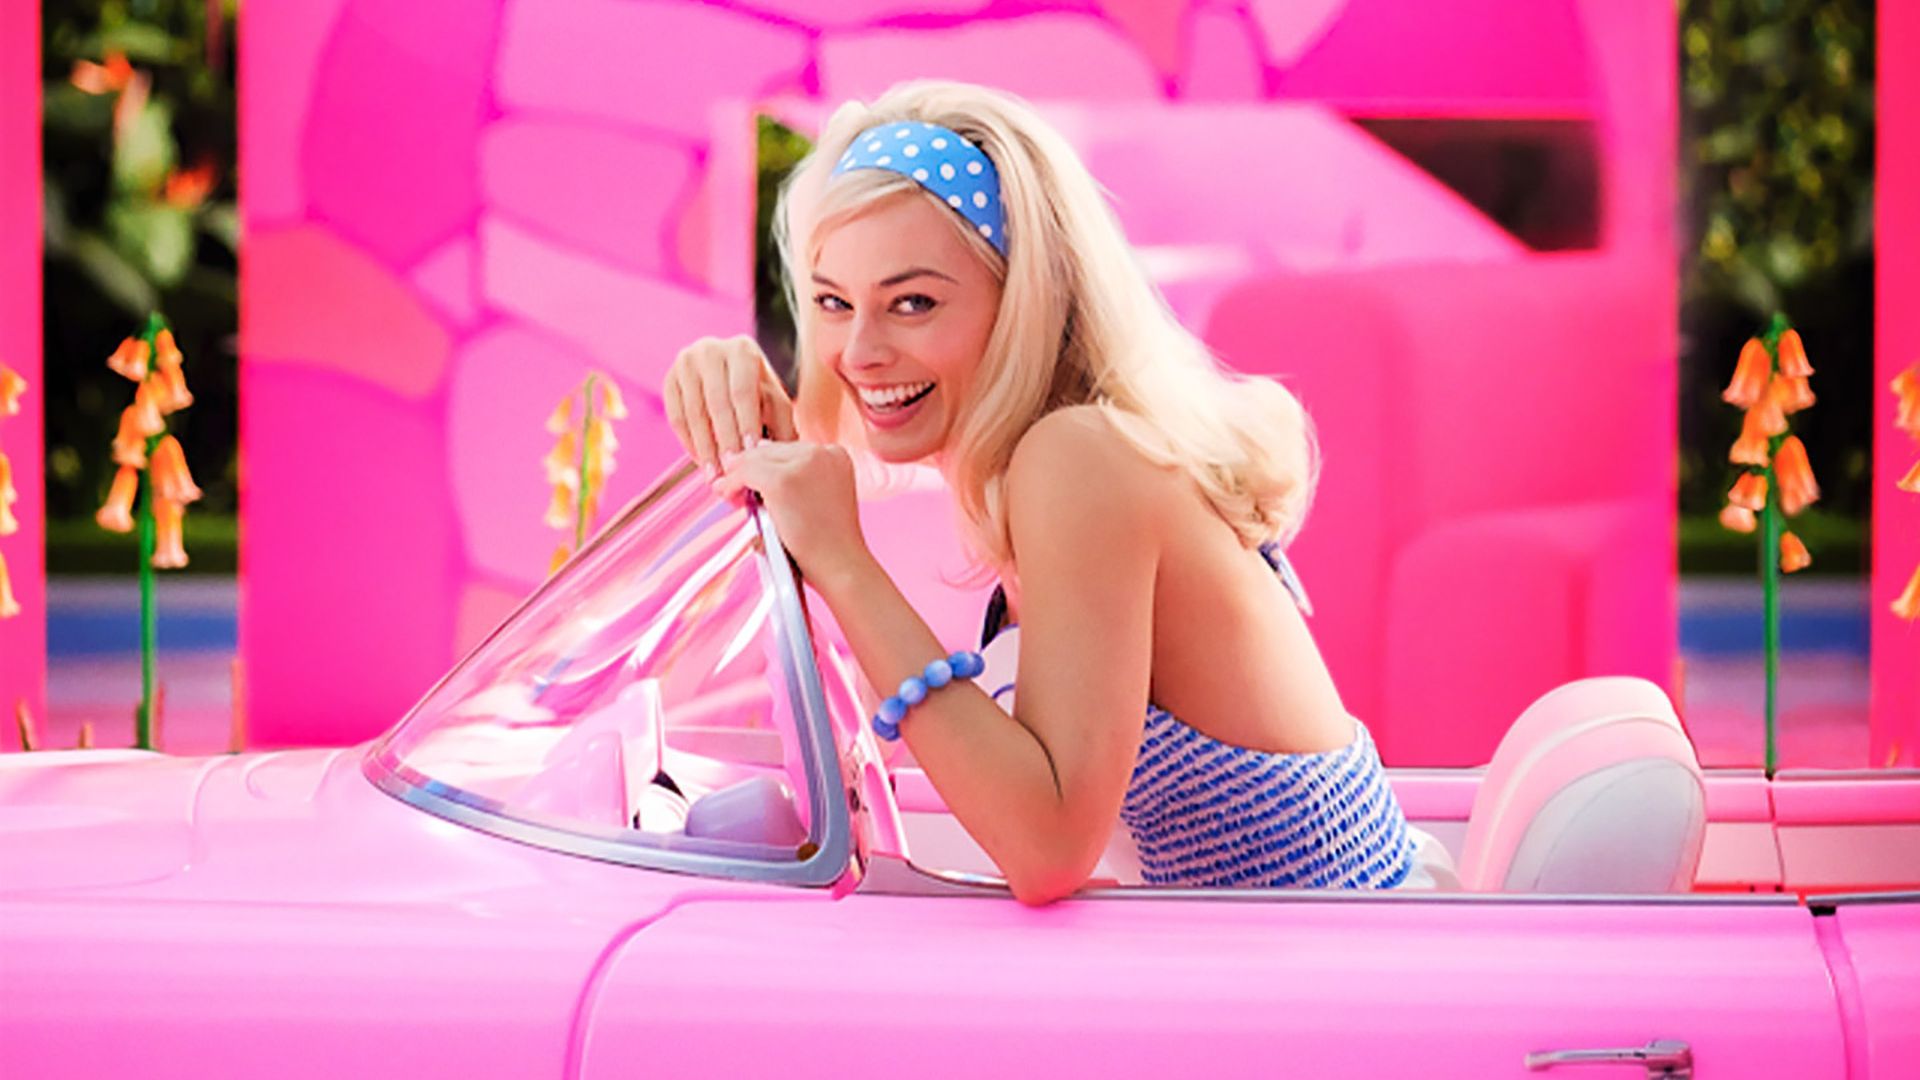 Margot Robbie's Barbie smiles as she sits in her pink car in her solo movie